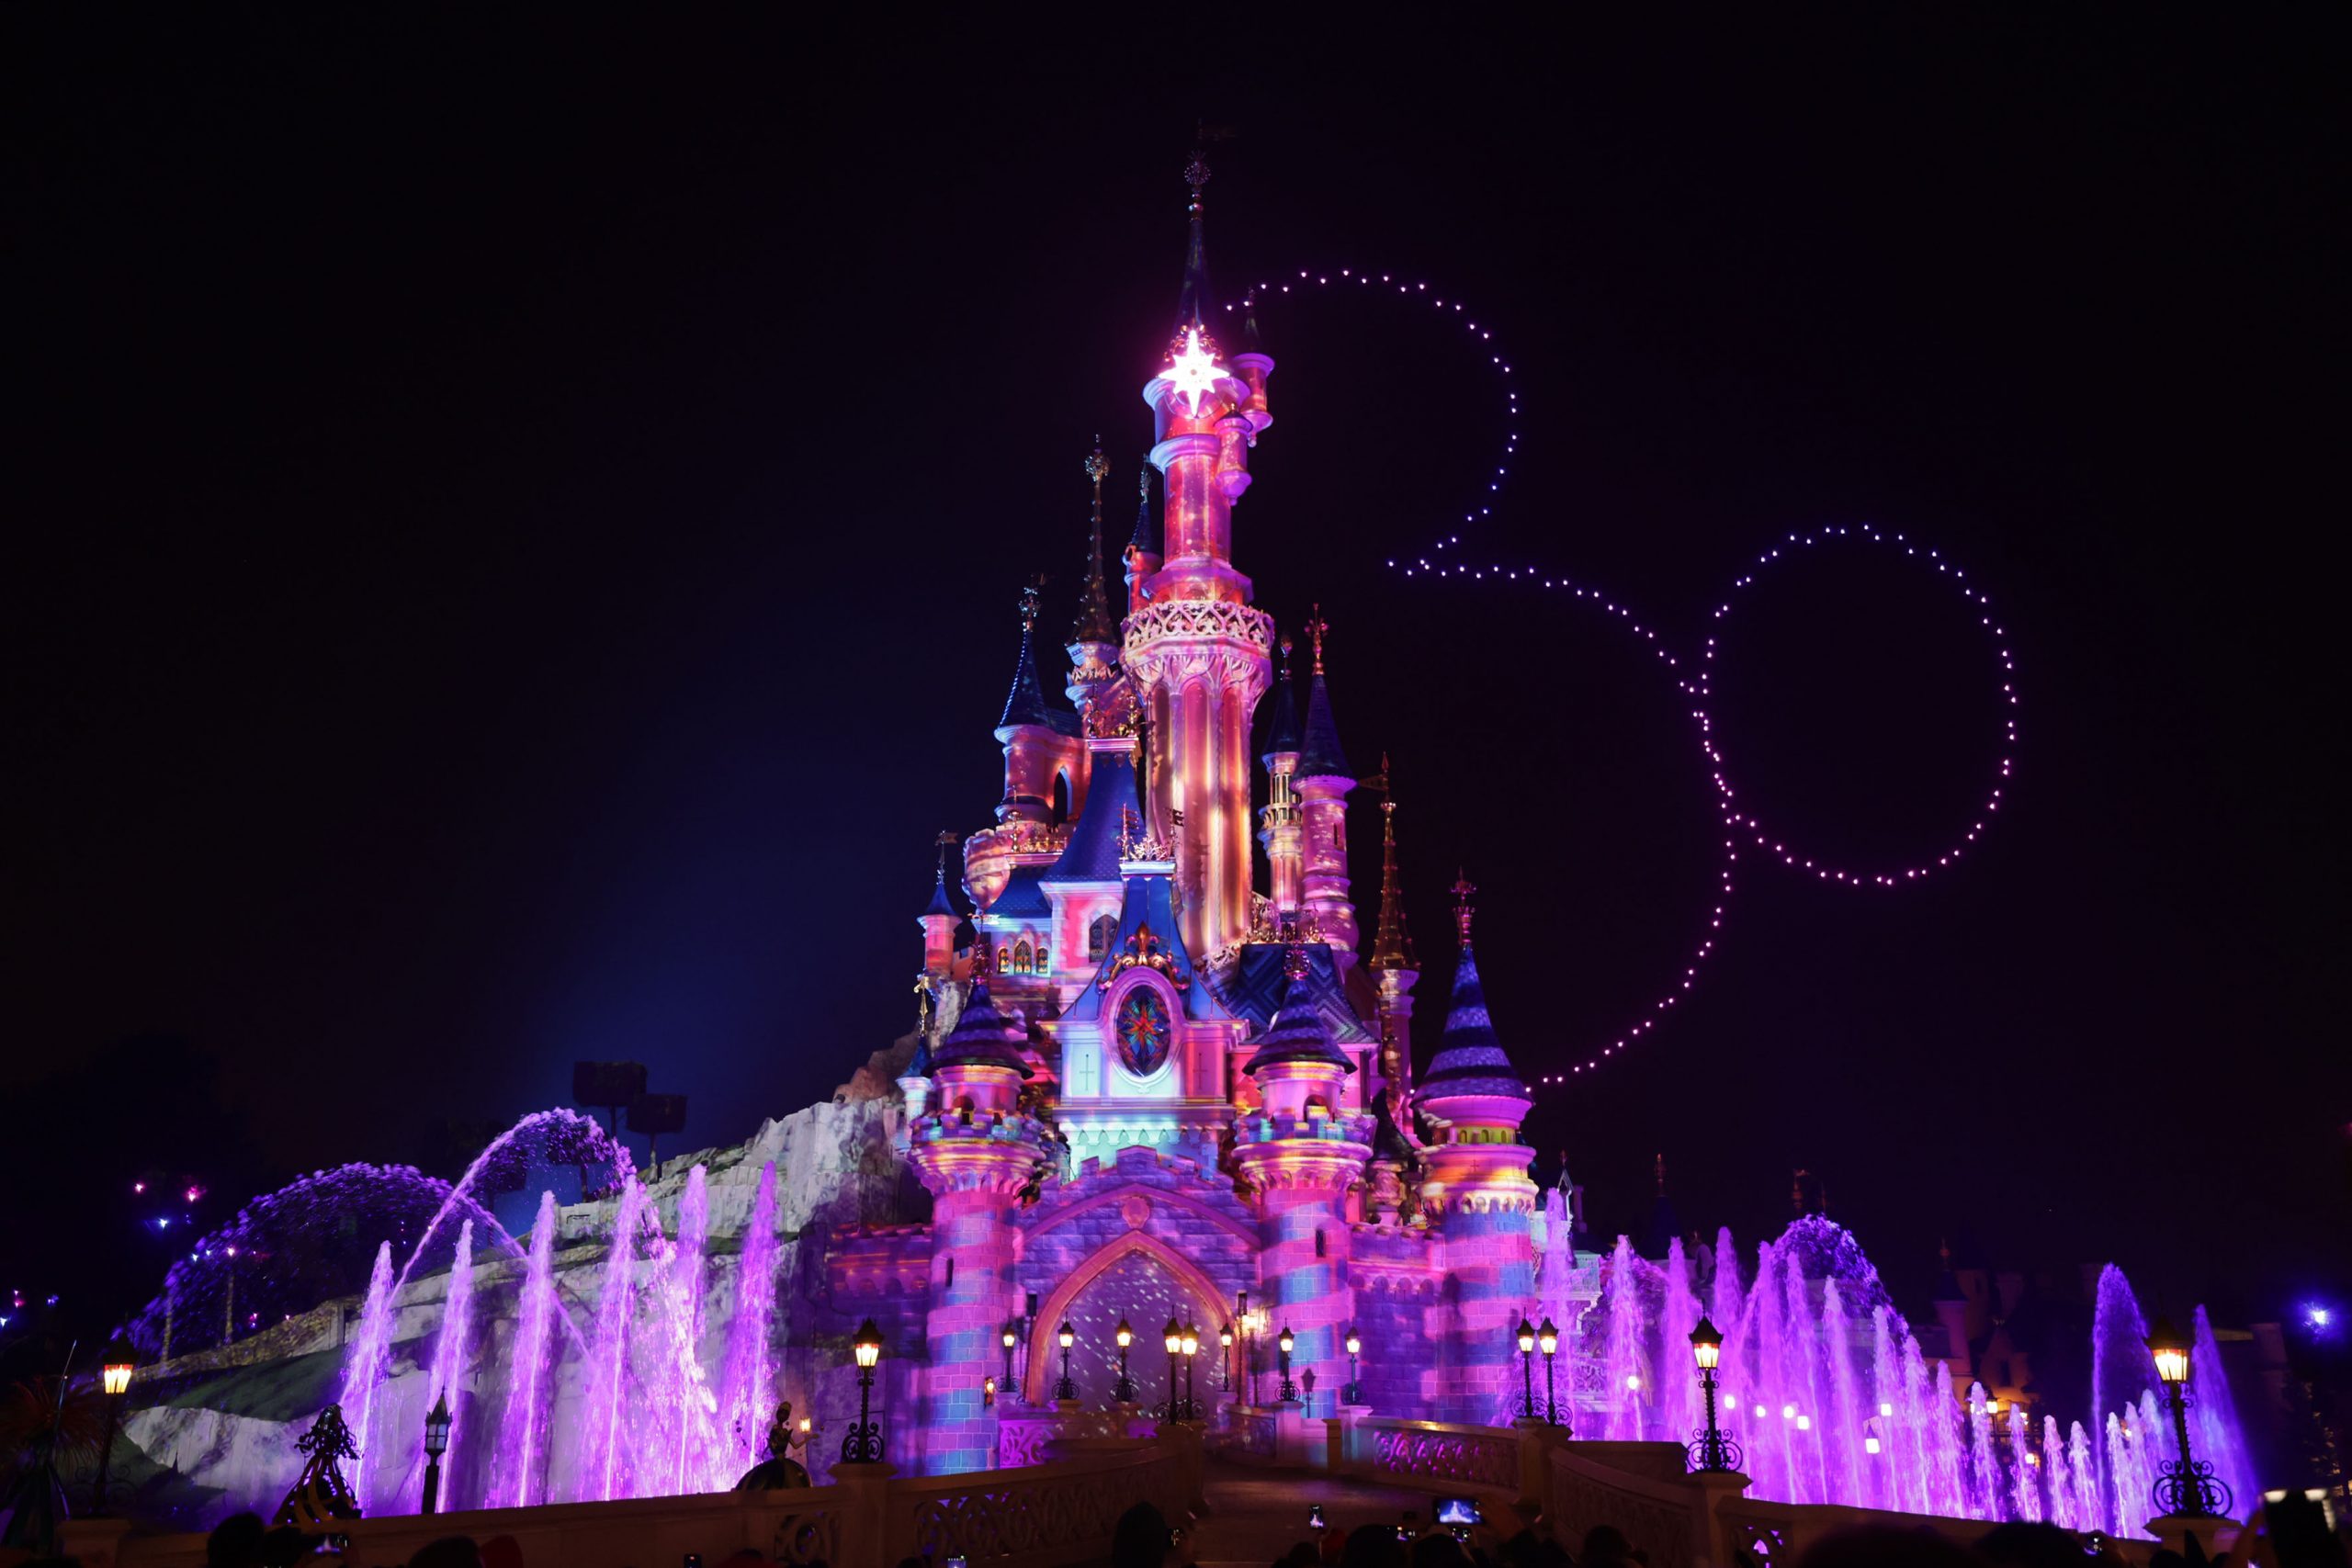 DISNEYLAND PARIS REACHES MILESTONE 30TH ANNIVERSARY, INTRODUCES NEW PRODUCTS AND EXPERIENCES FOR GUESTS OF ALL AGES